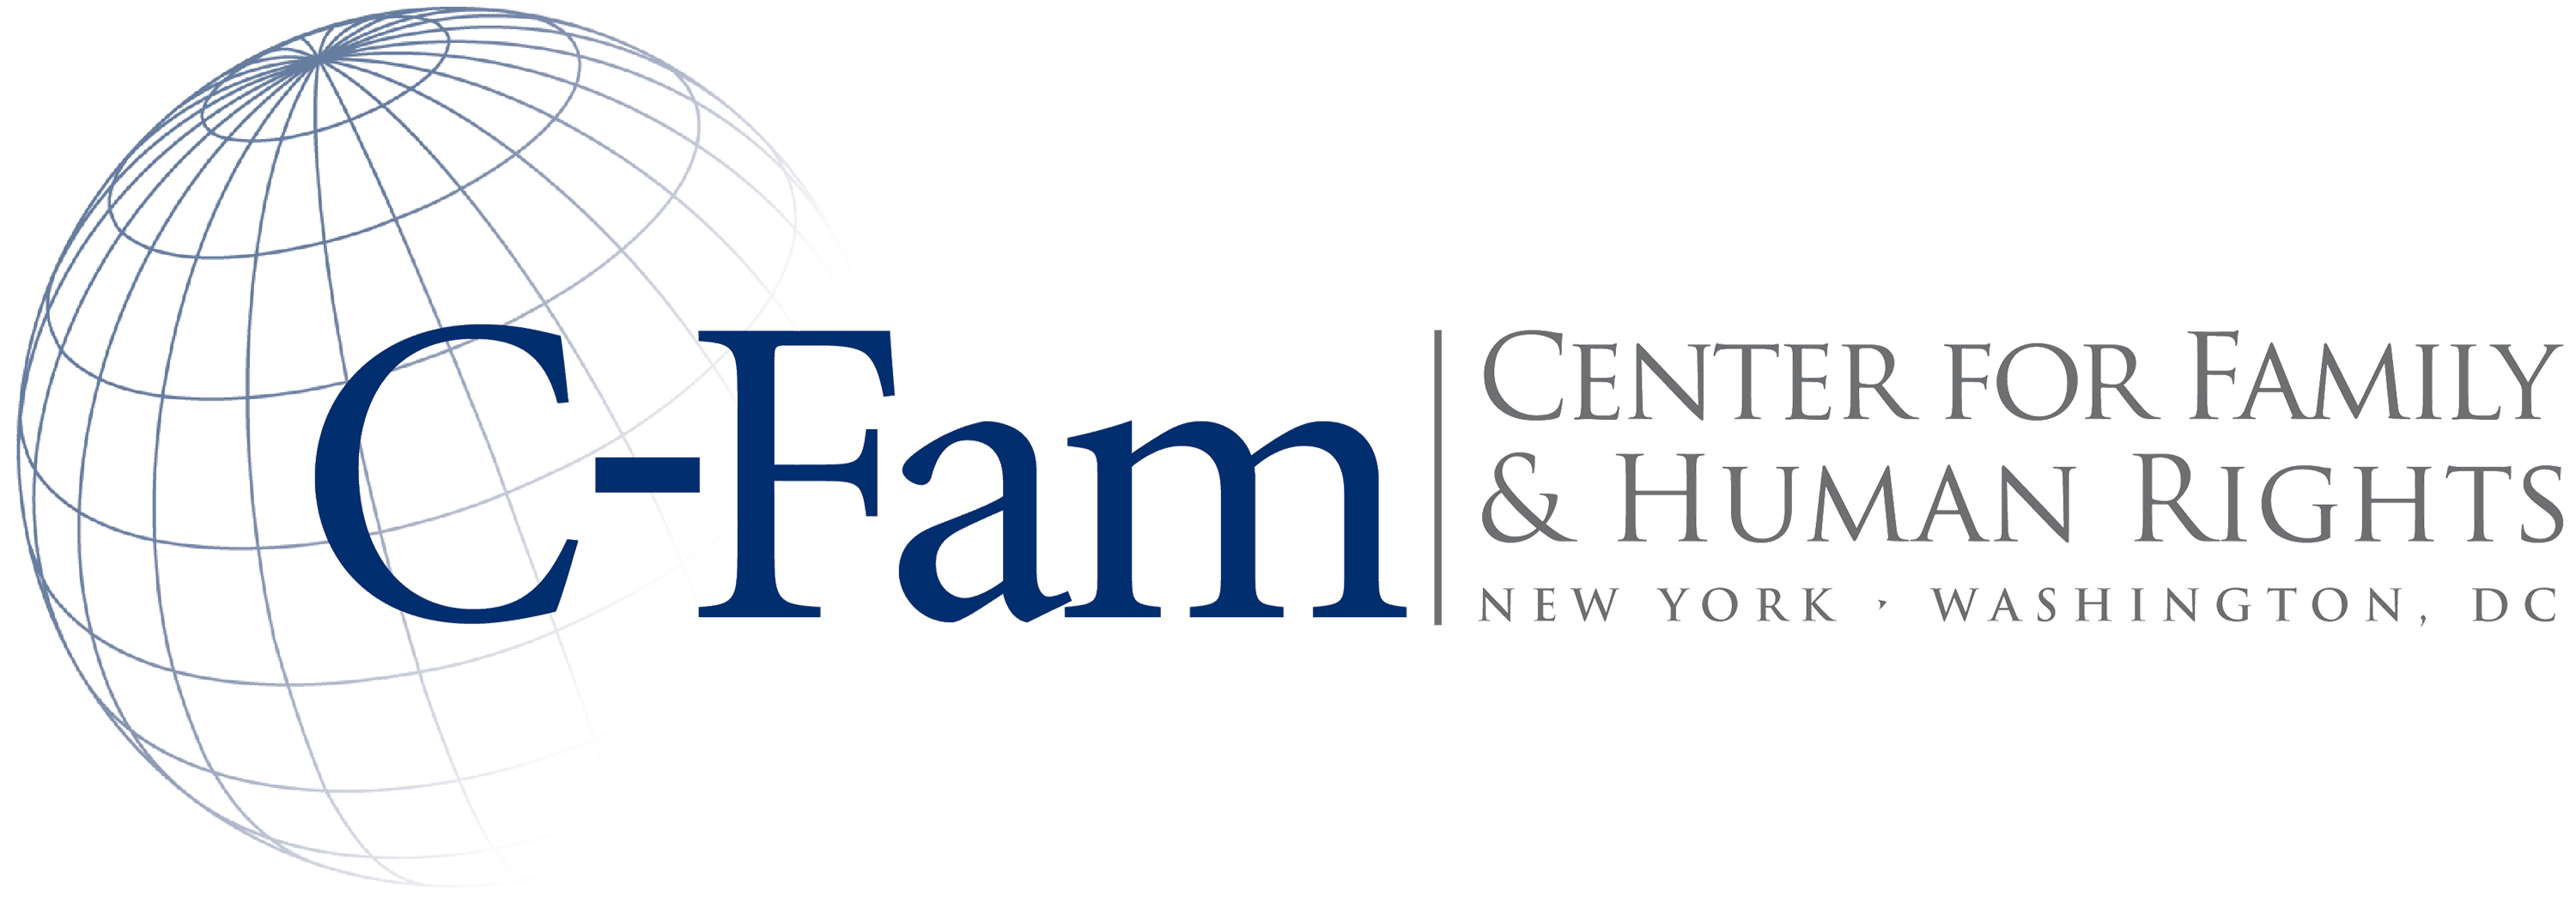 center for family and human rights logo